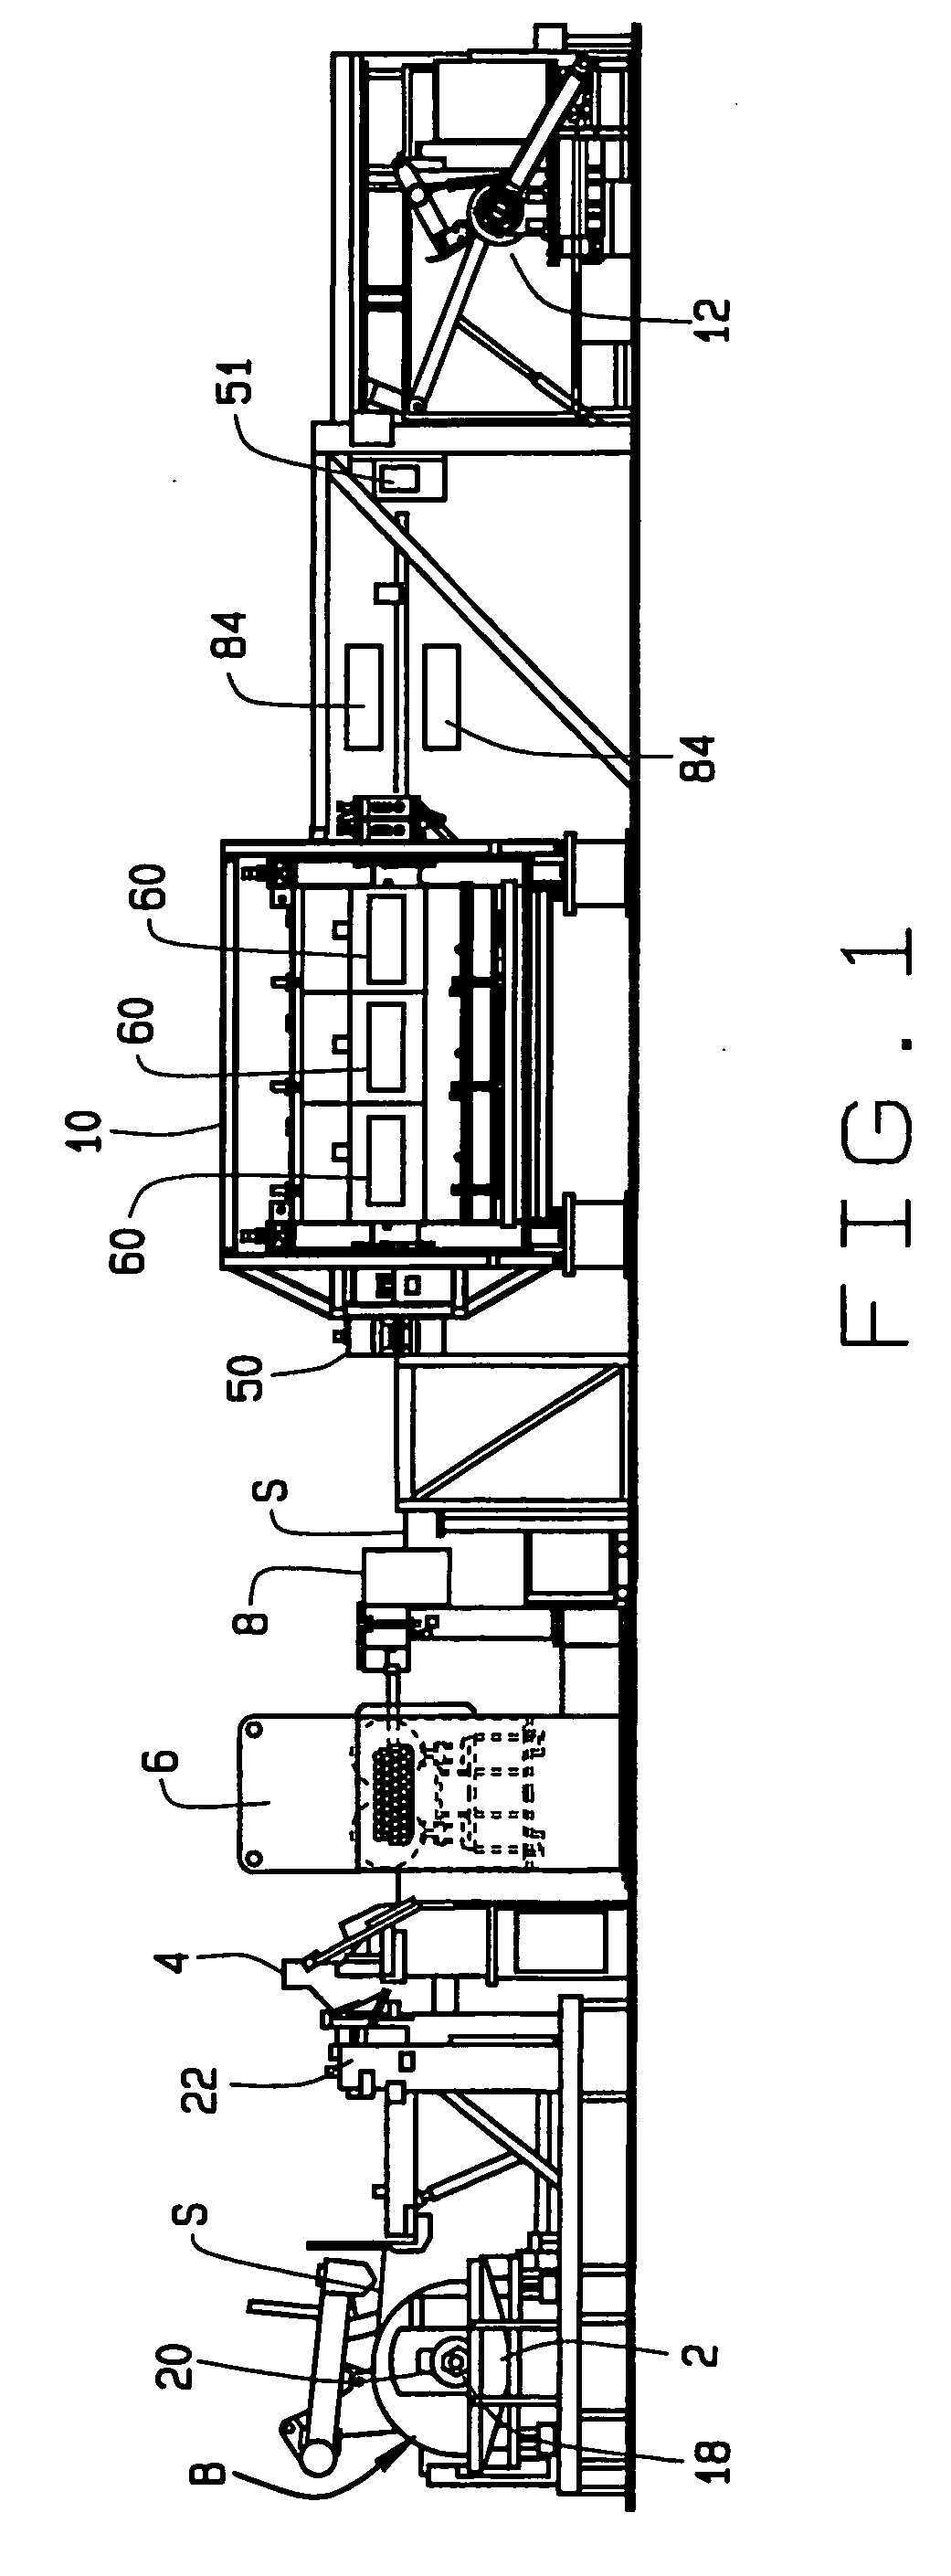 Method and apparatus for conditioning sheet metal